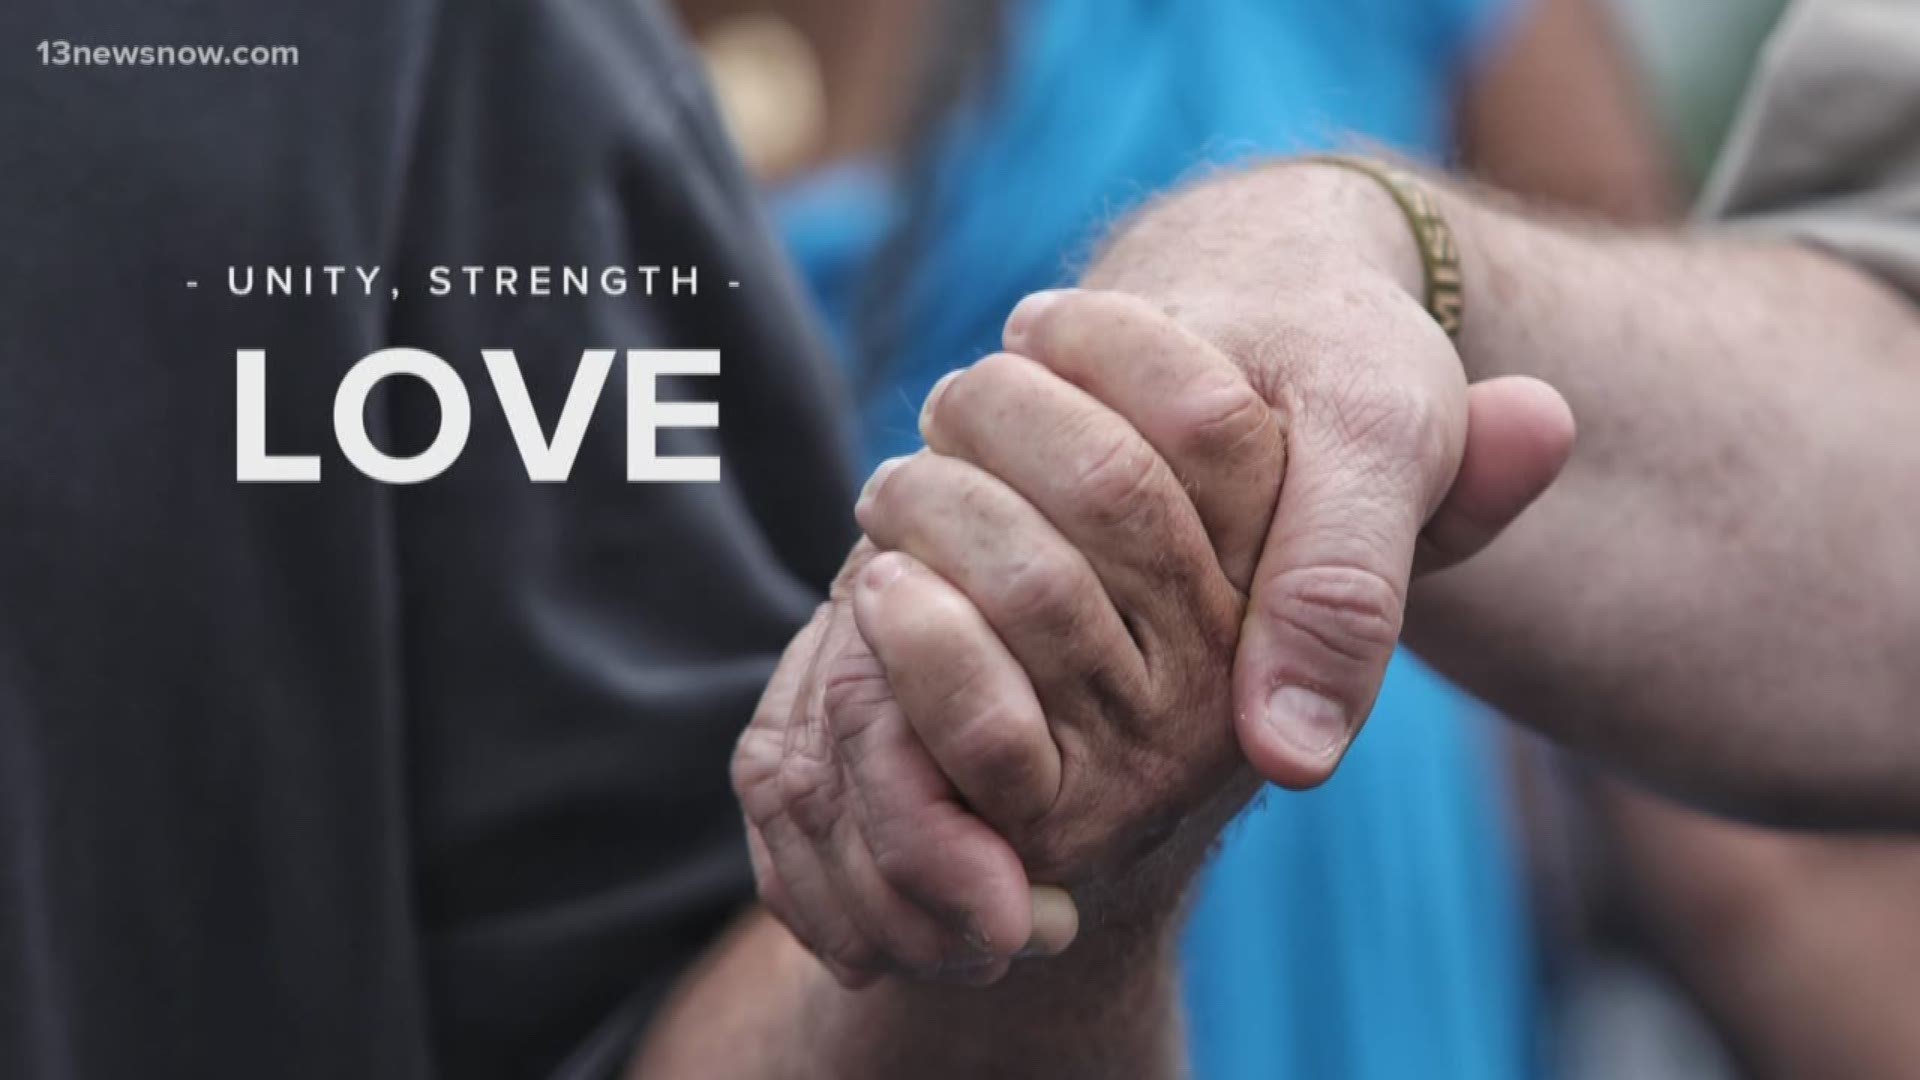 Unity, strength, and love are the resounding message coming from Virginia Beach in the aftermath of Friday's tragic shooting at the city's municipal center.